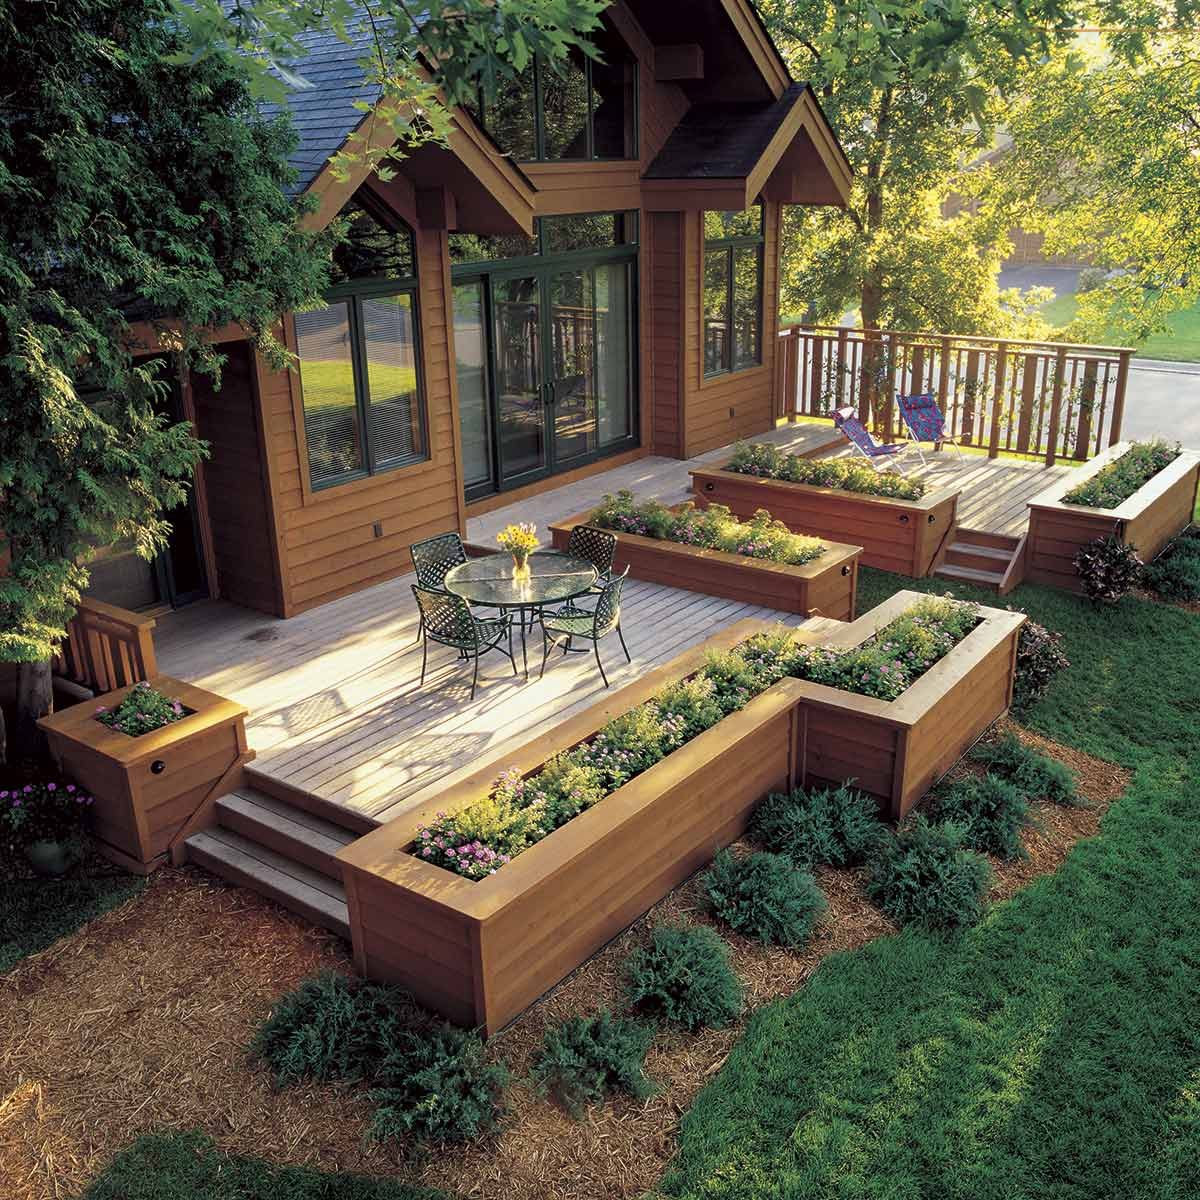 16 Gorgeous Deck and Patio Ideas You Can DIY | Family Handyman